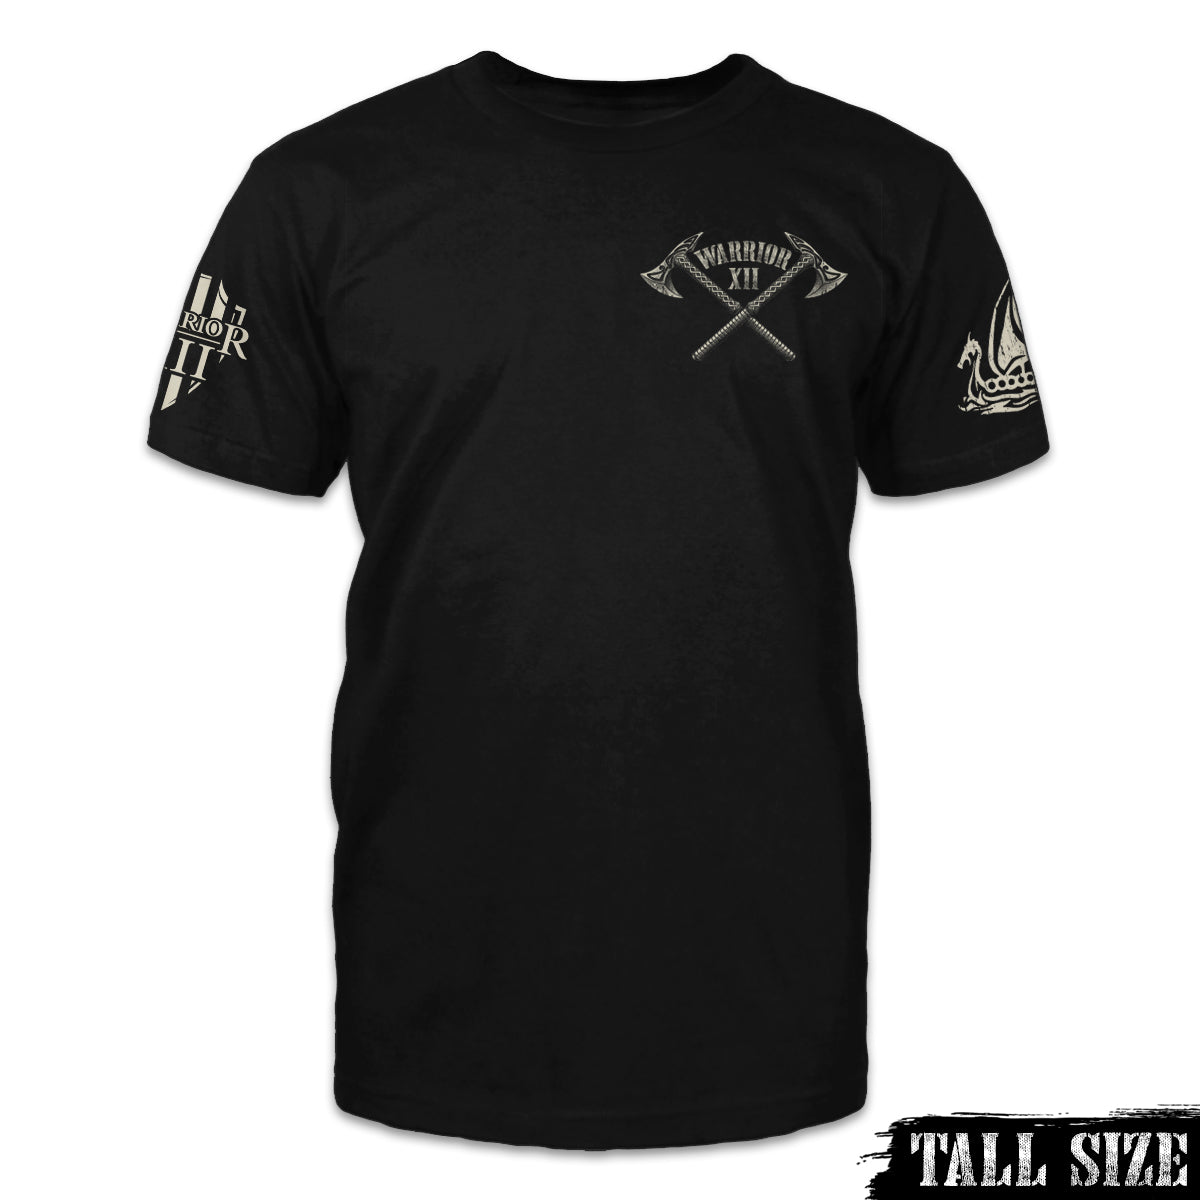 A black American Viking tall sized t-shirt with the words "Warrior 12" and two axes printed on the front of the shirt.